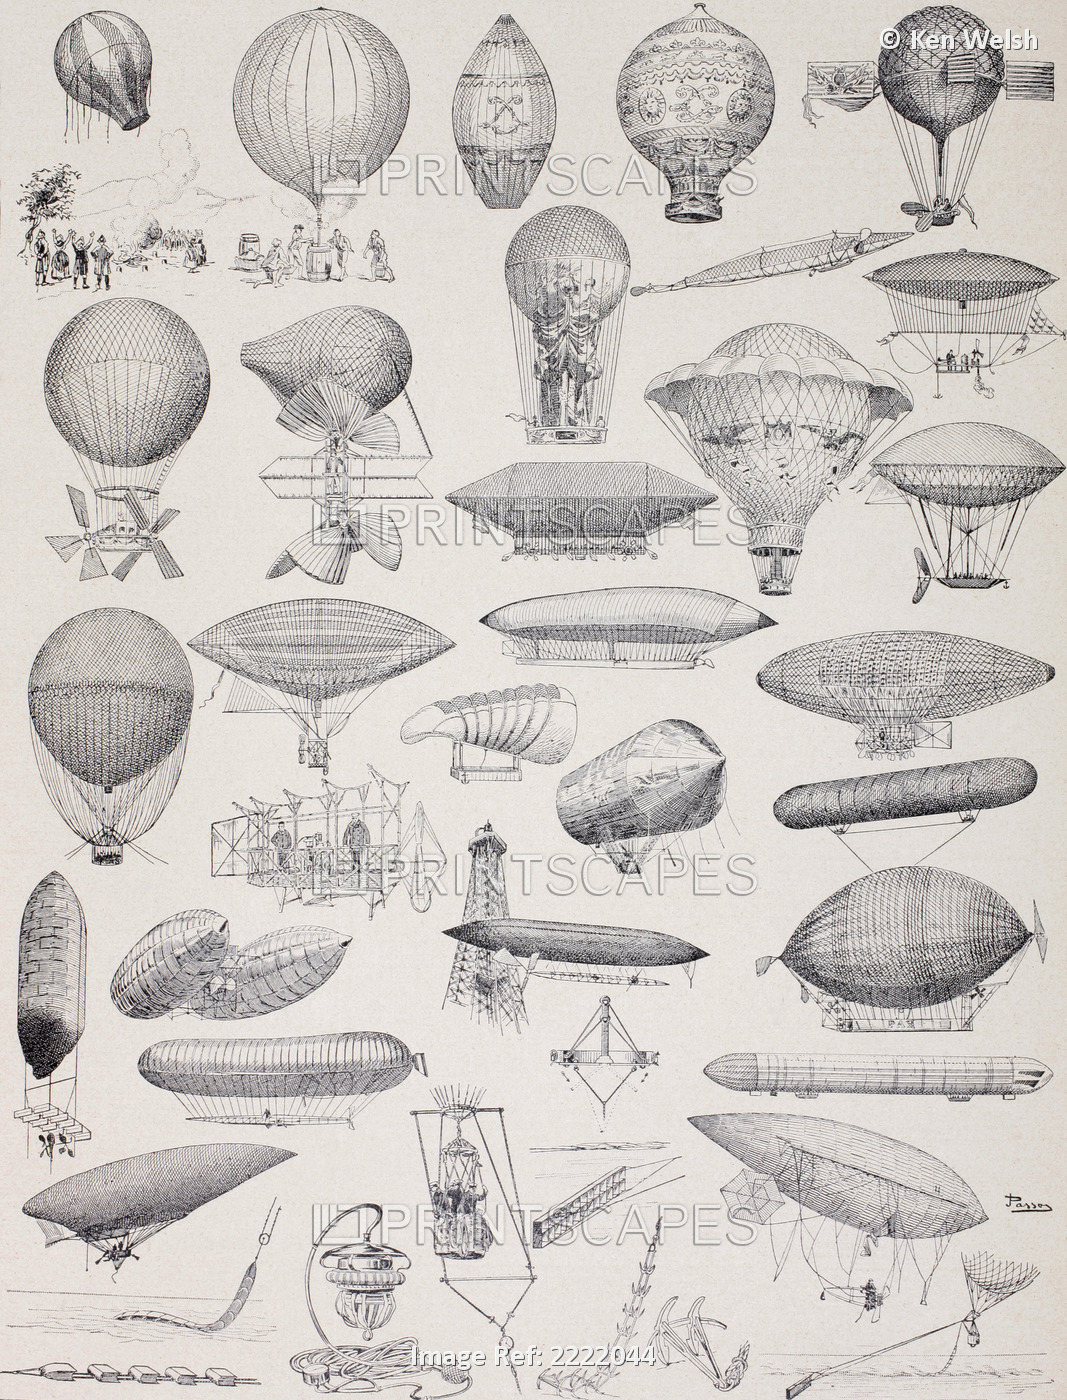 Hot Air Balloons Throughout History Starting With The Montgolfier Brothers ...